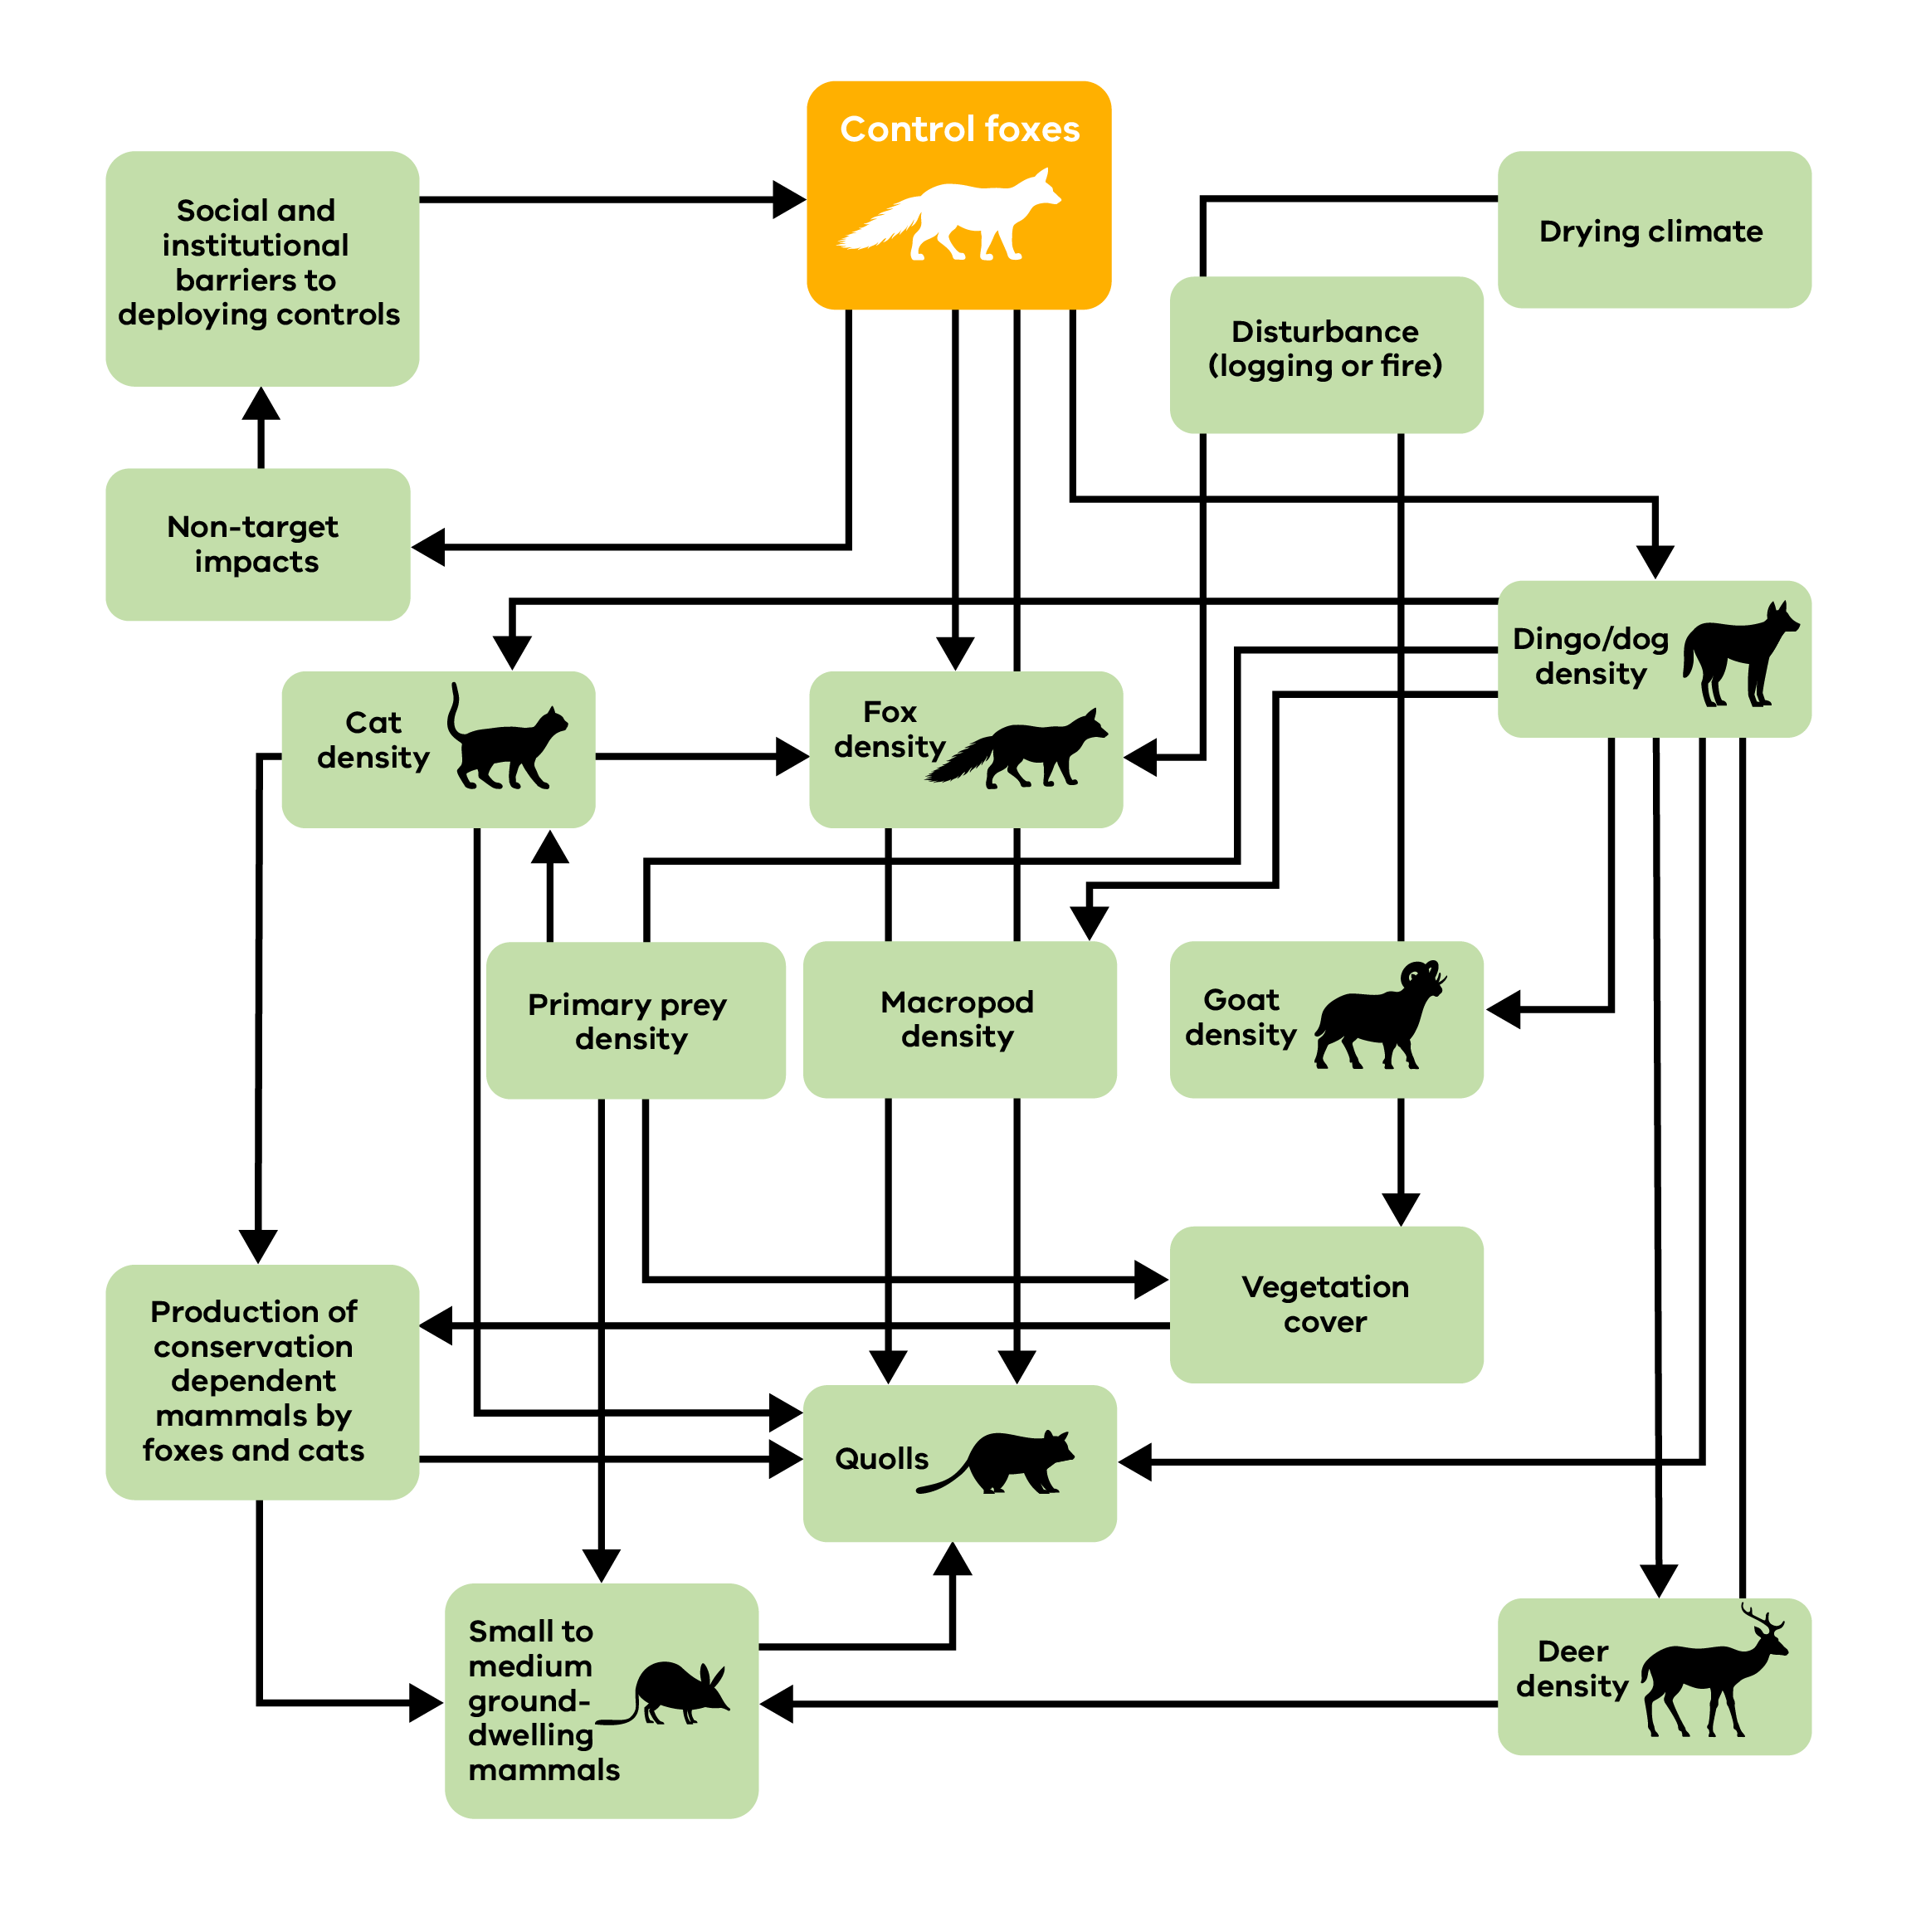 Example of a flowchart showing the complex relationships and considerations relevant to fox control.